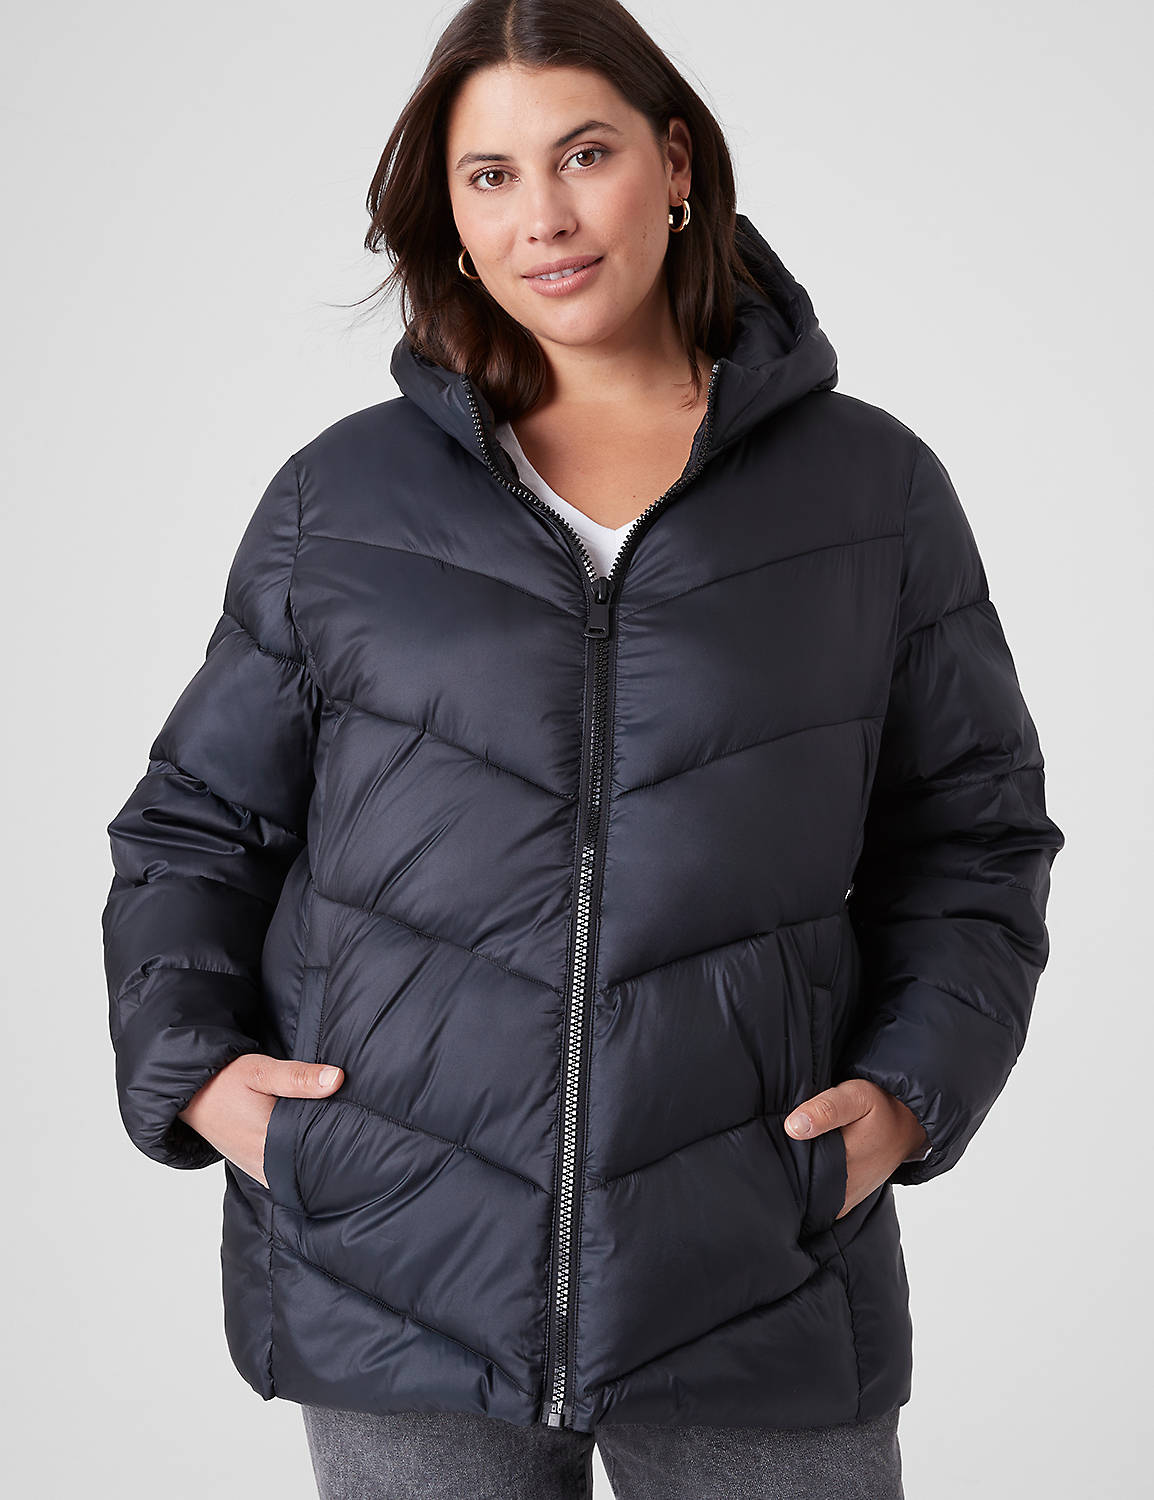 REGULAR LENGTH PUFFER with Hood 113 Product Image 3